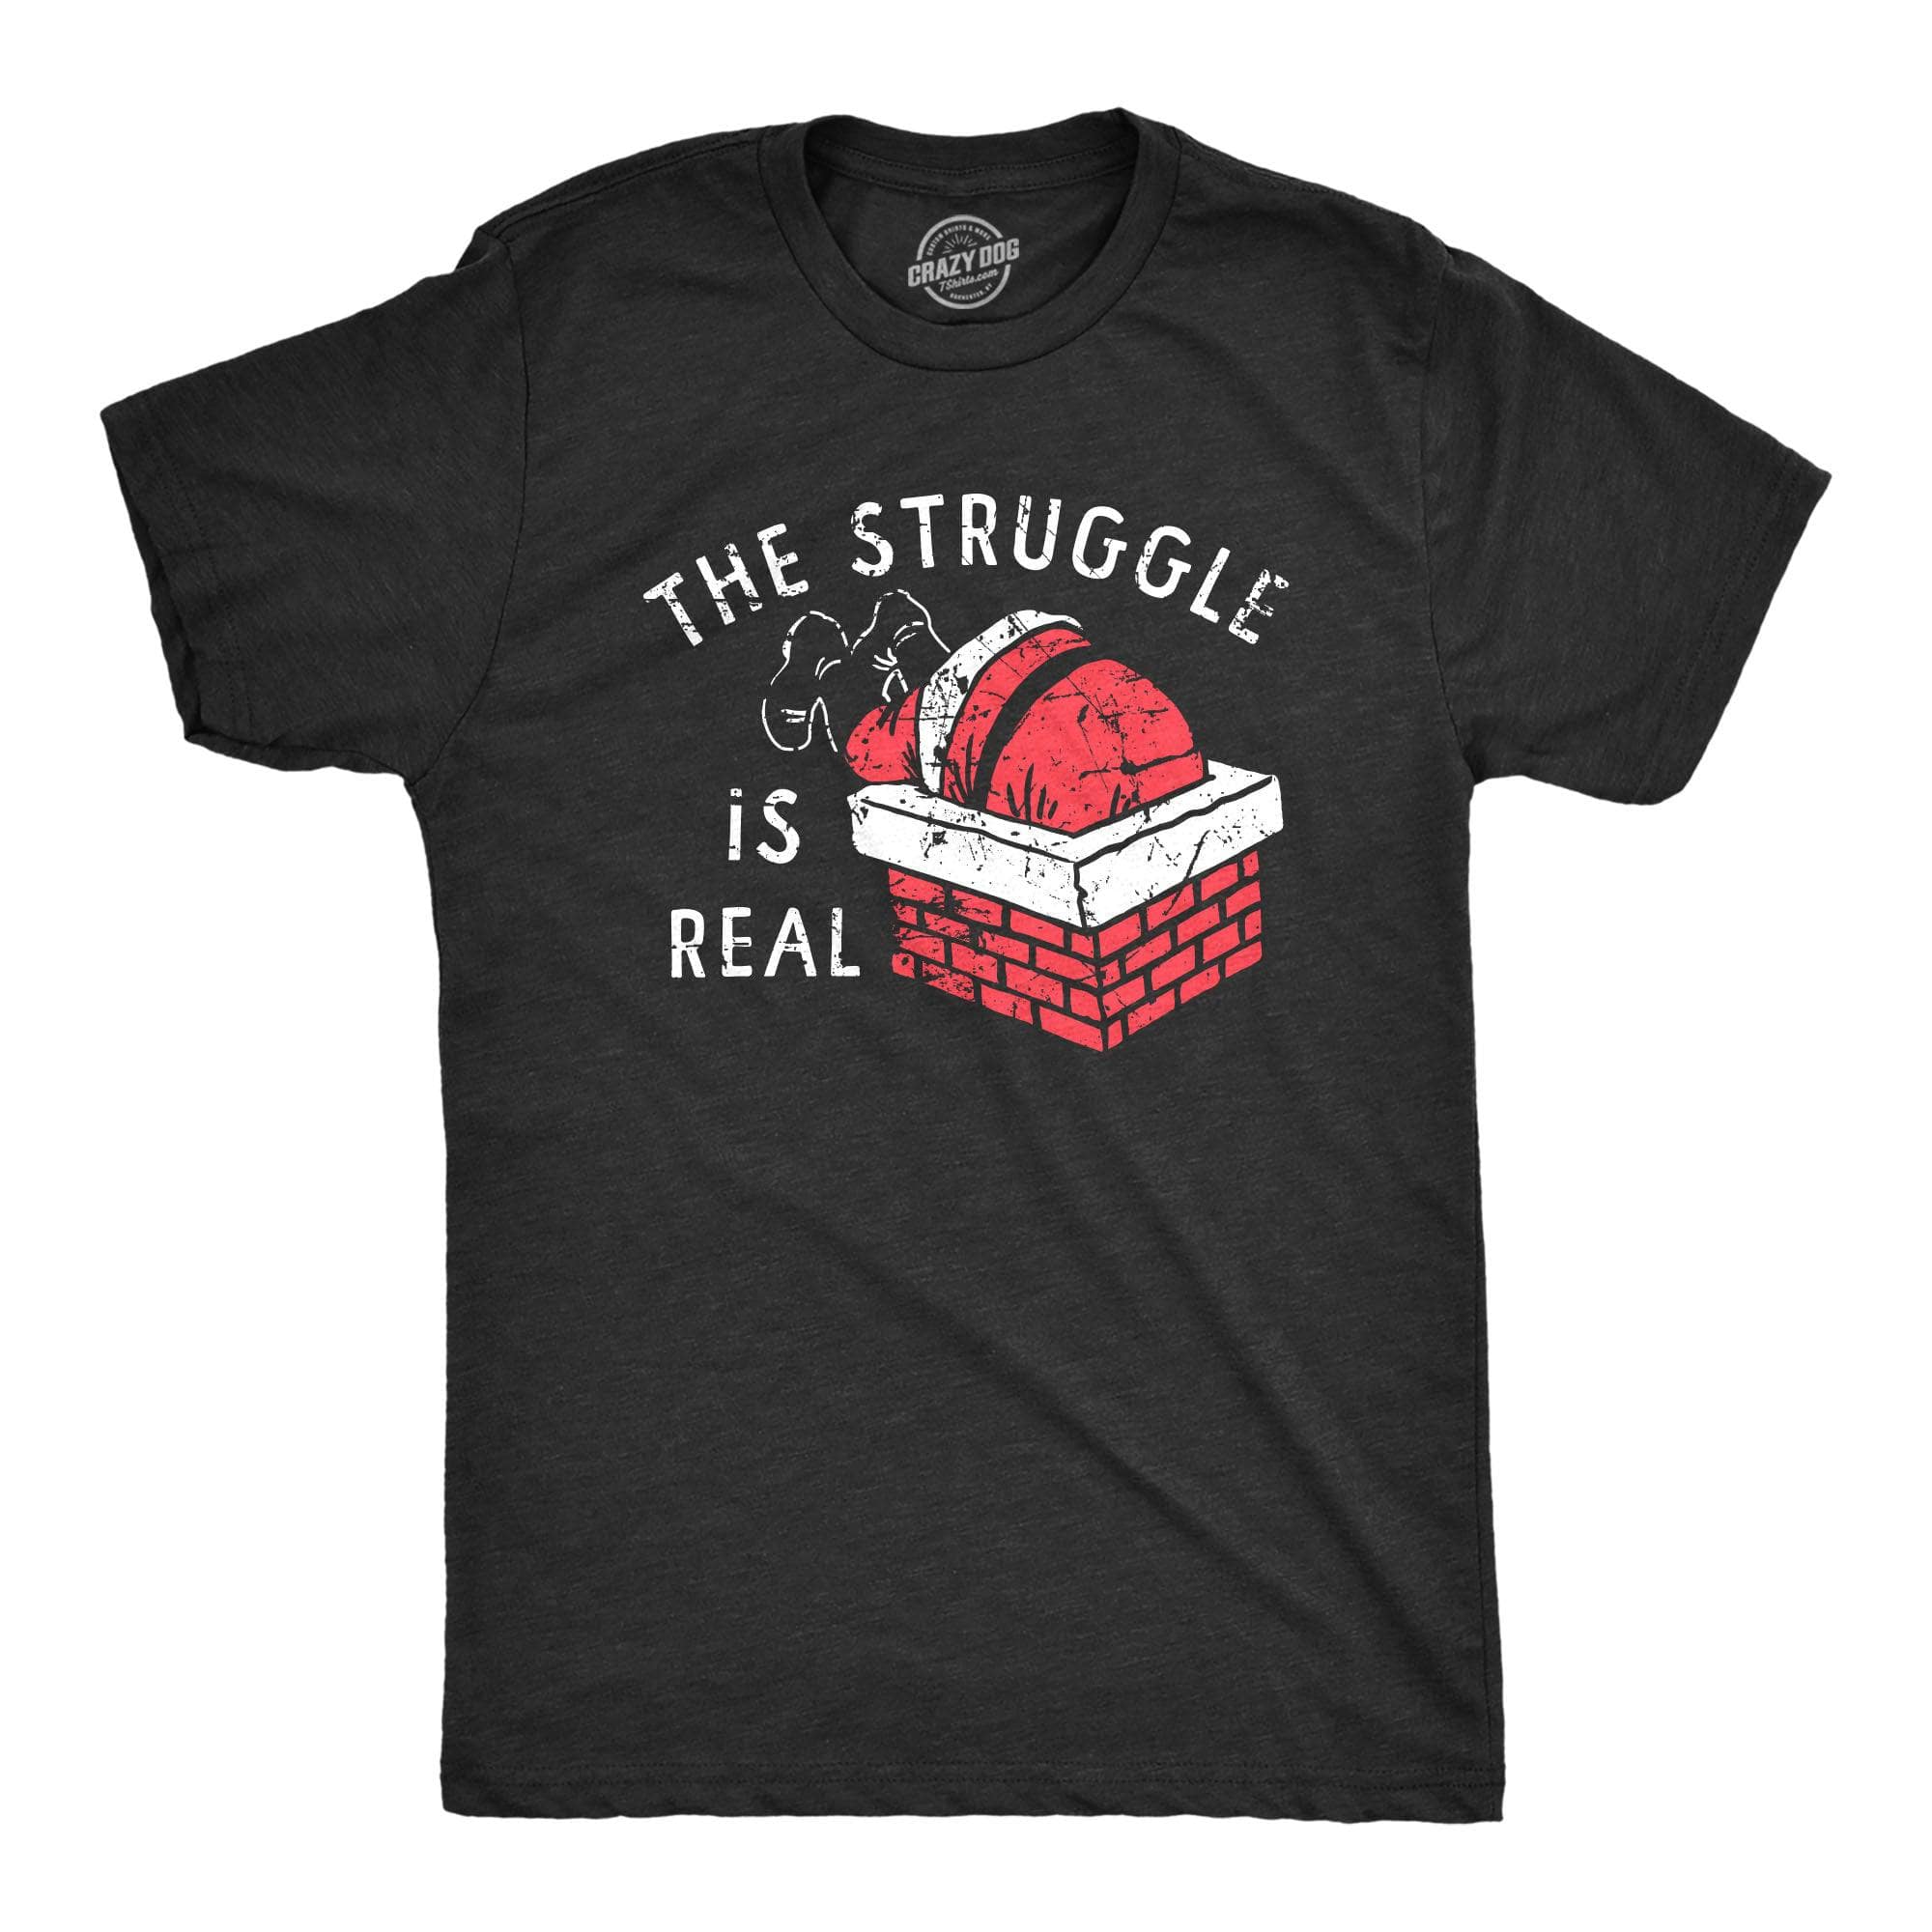 The Struggle Is Real Men's Tshirt  -  Crazy Dog T-Shirts